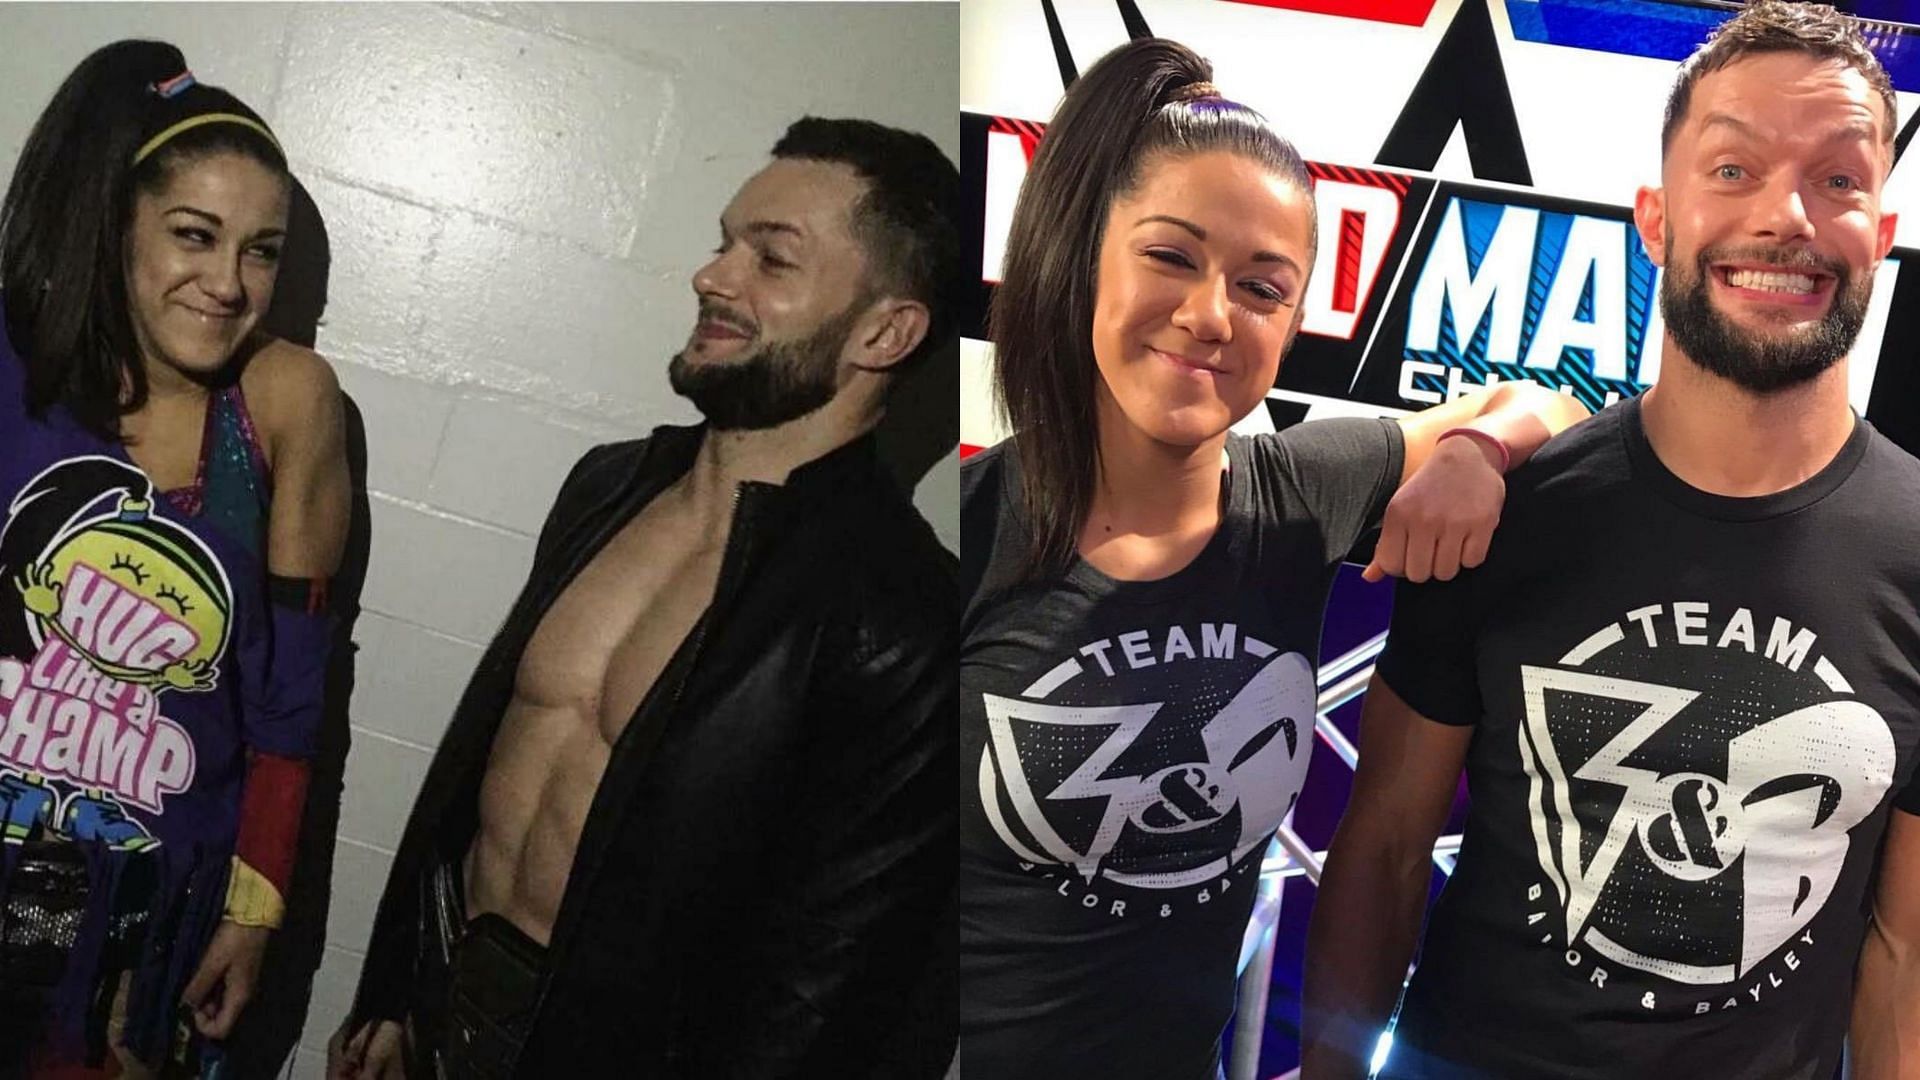 Rumors suggested that Bayley and Finn Balor dated